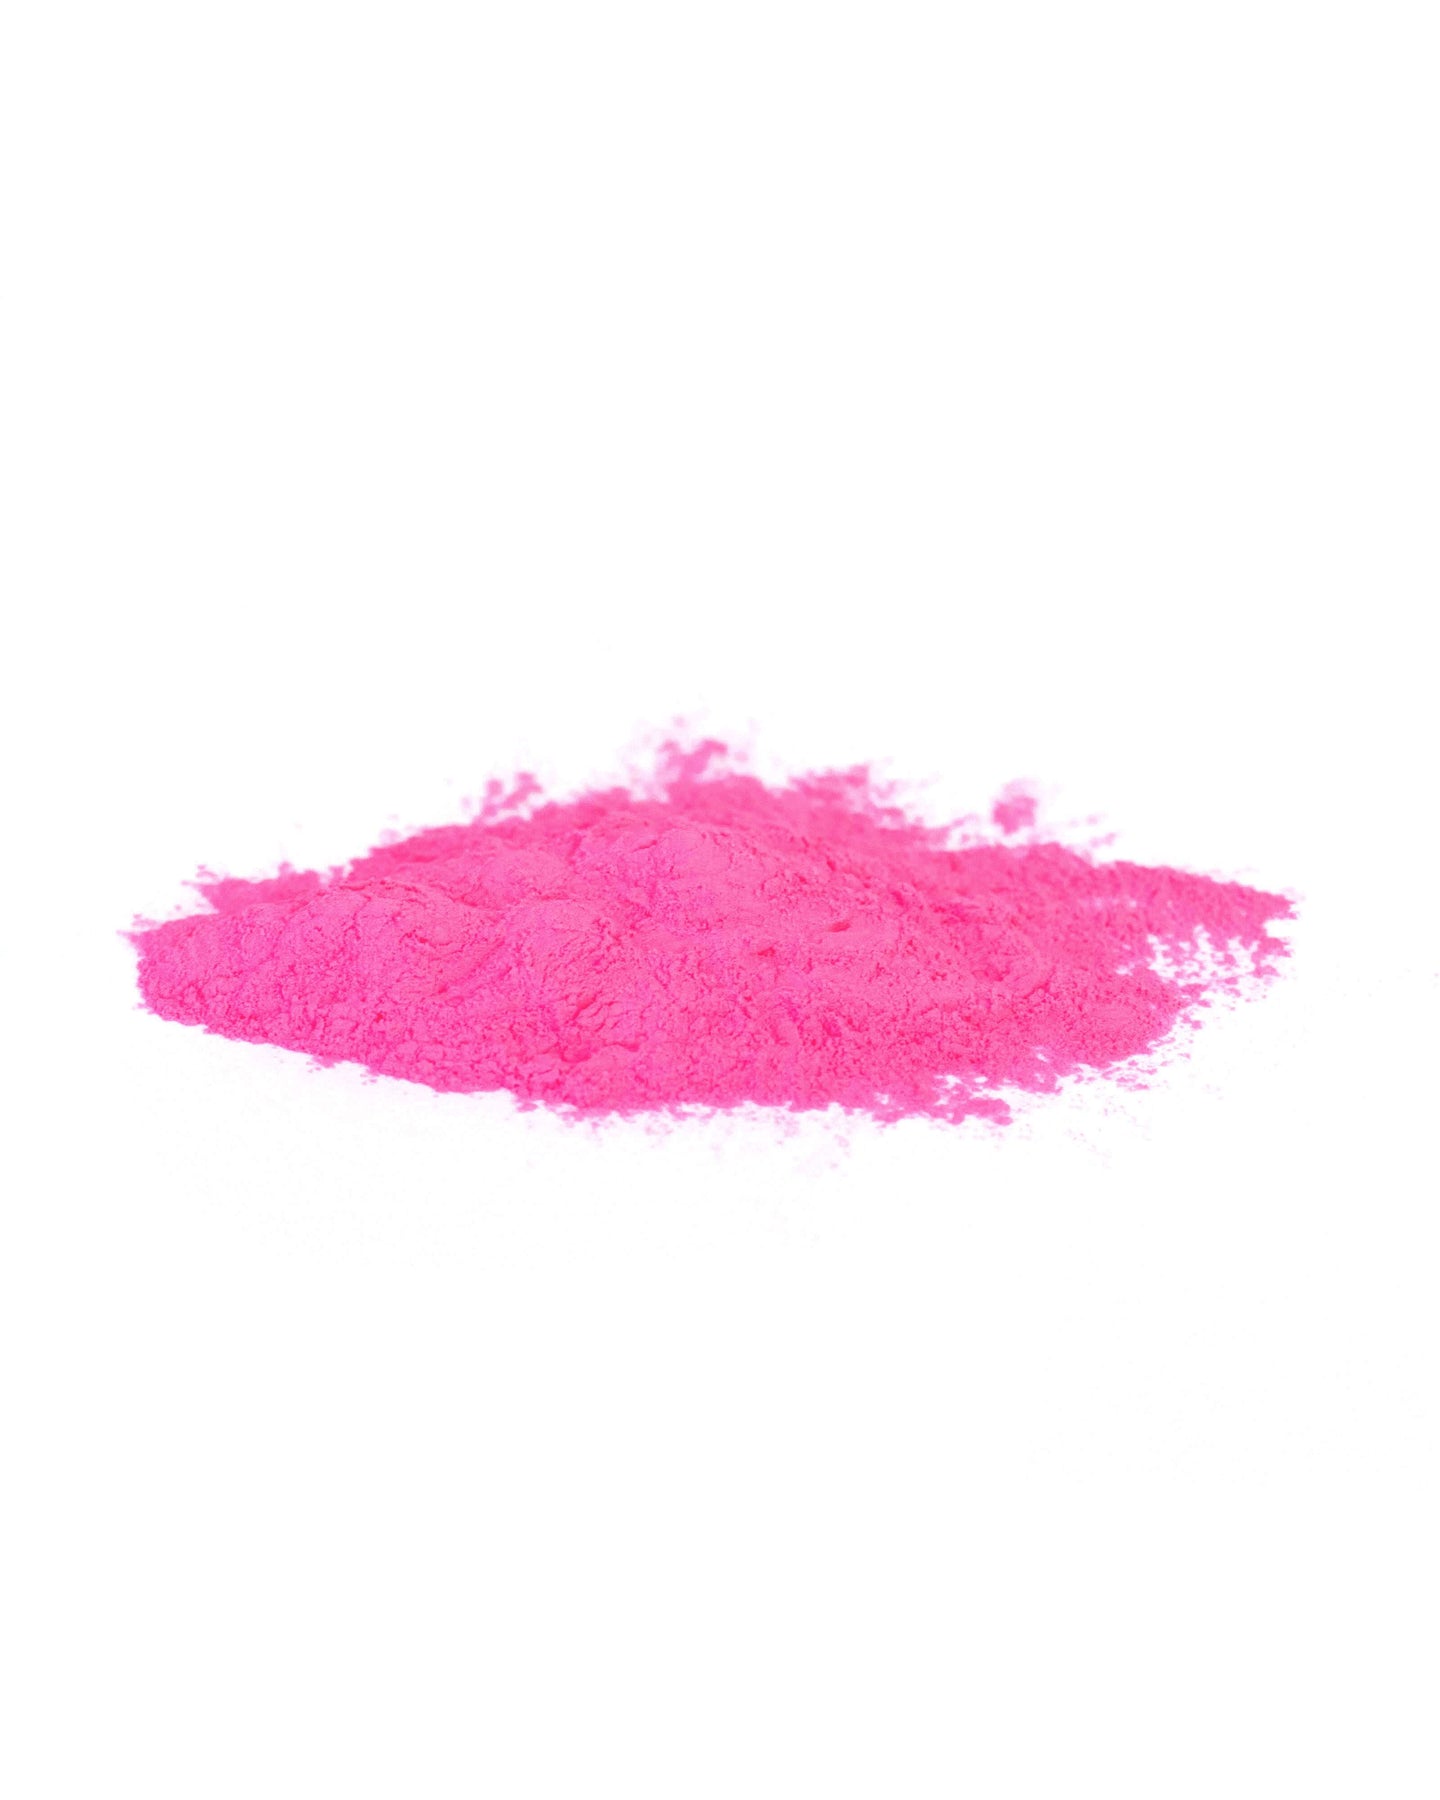 PINK to HOT PINK Glow-in-the-dark Pigment Powder / Resin Craft Additive /  Nail Art / Pendants / Jewelry -  Denmark